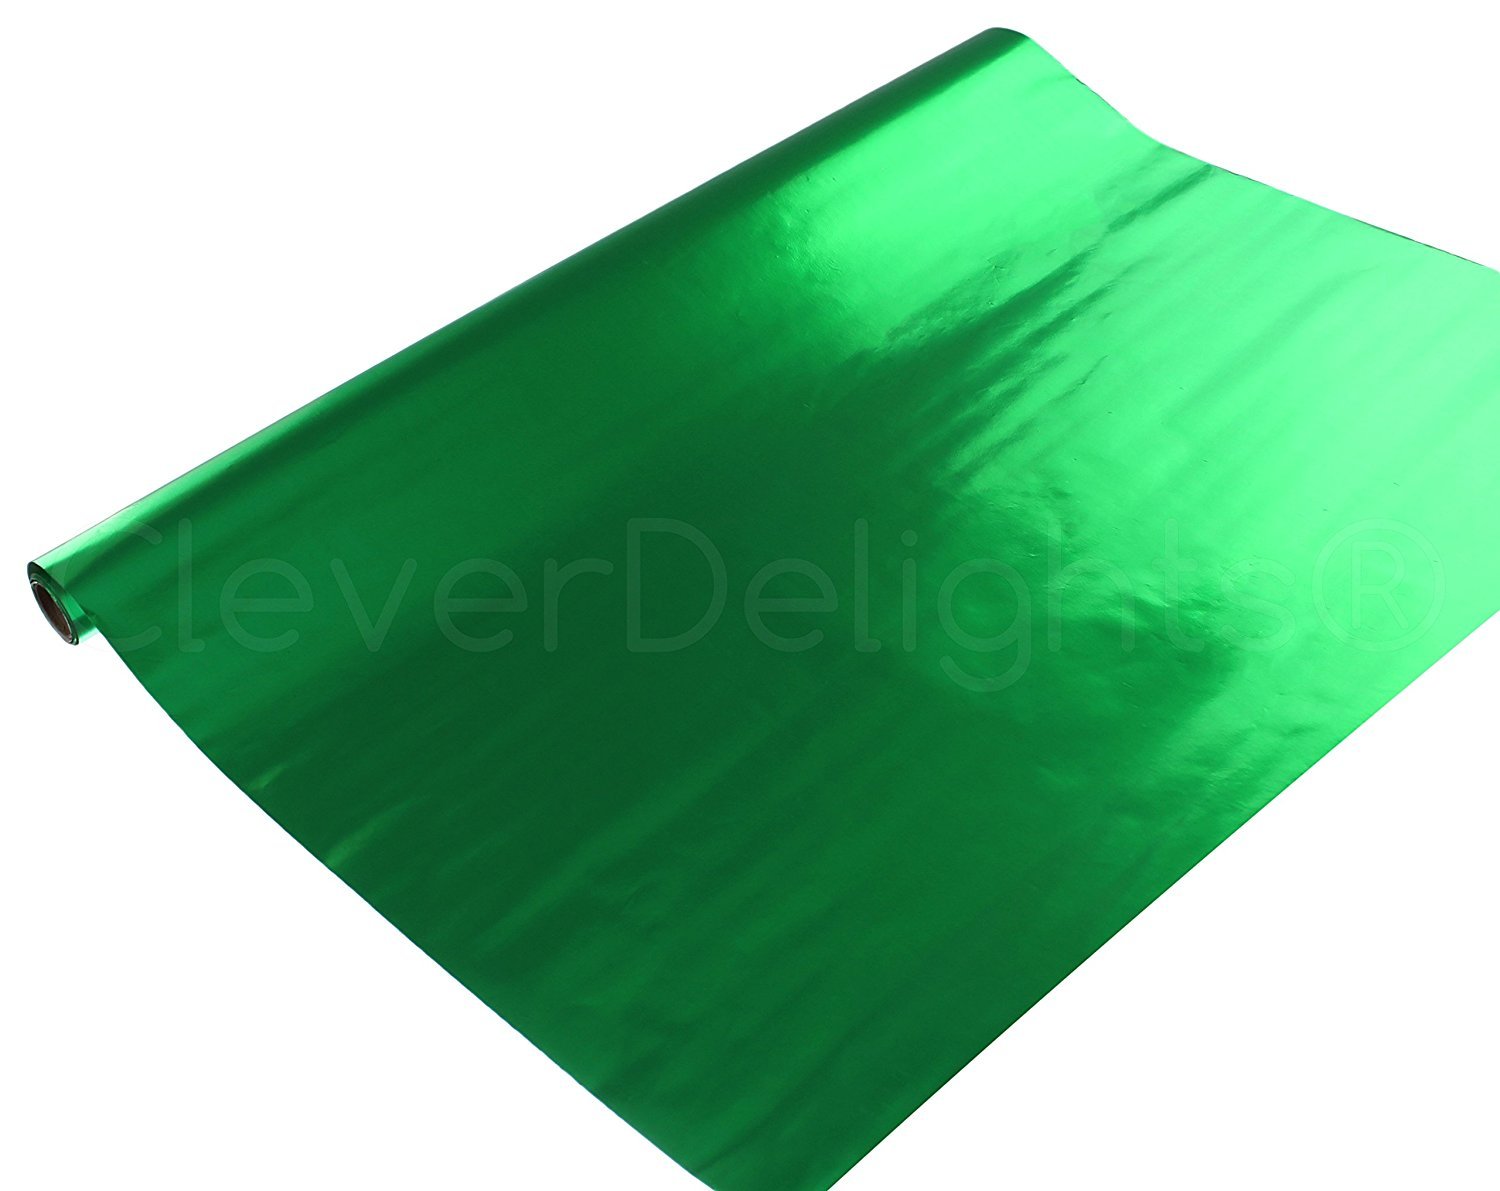 4 Rolls - CleverDelights Metallic Green Wrapping Paper - 30 x 300